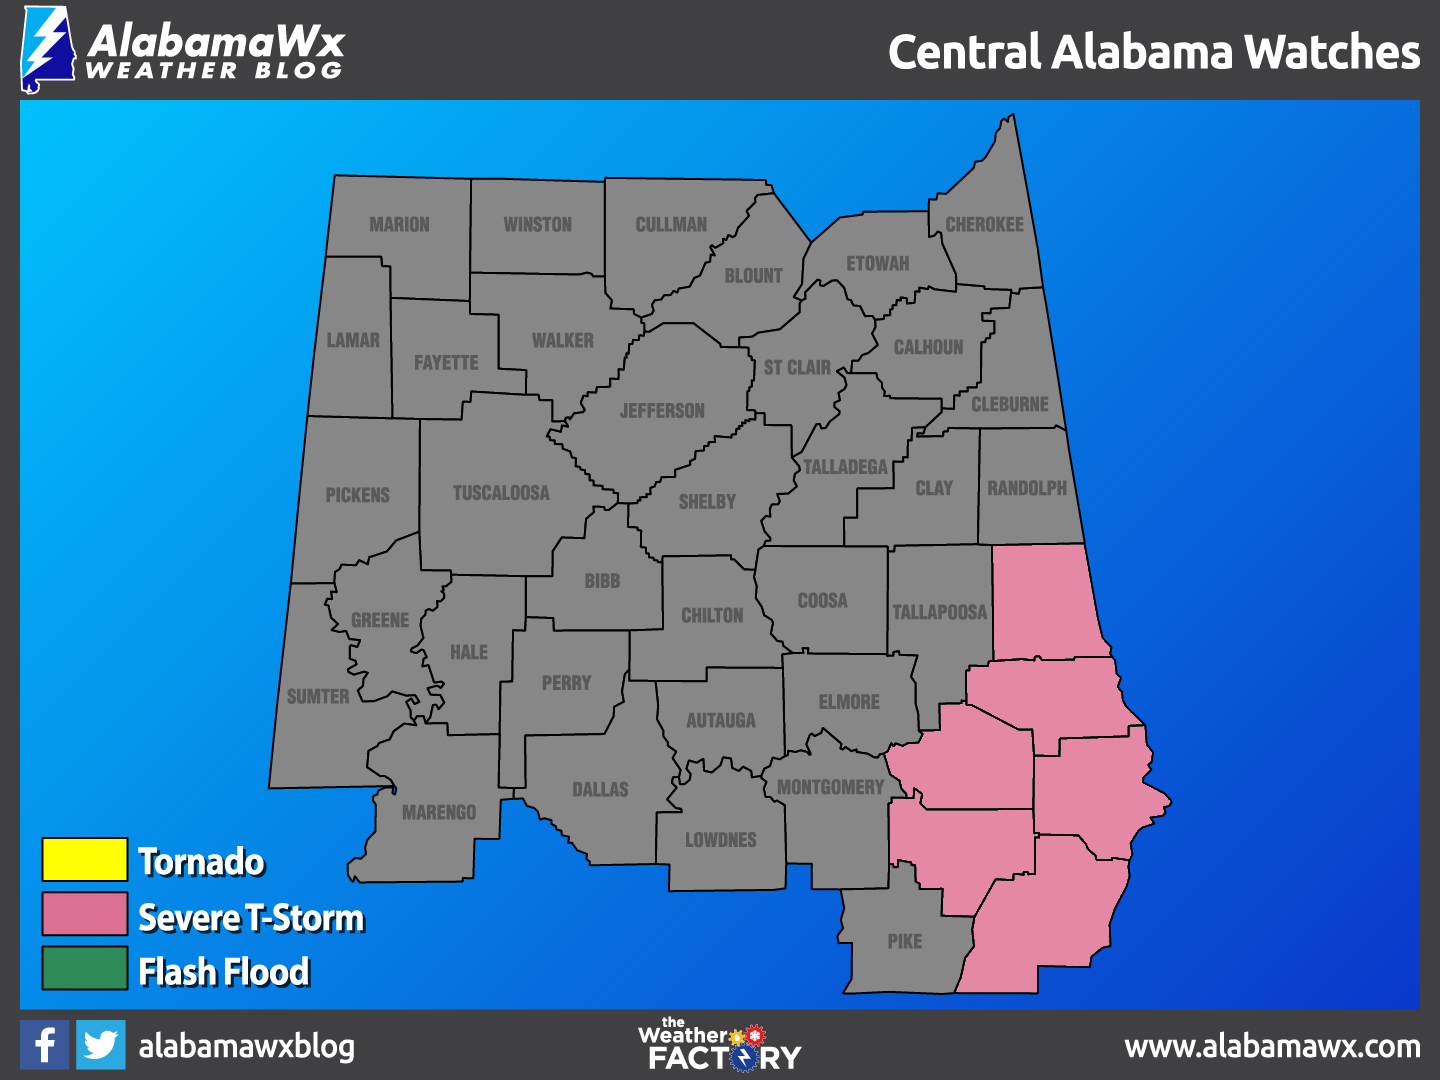 Alabama Weather Update Just After 10:30 p.m.: Second Line of Storms Develop...